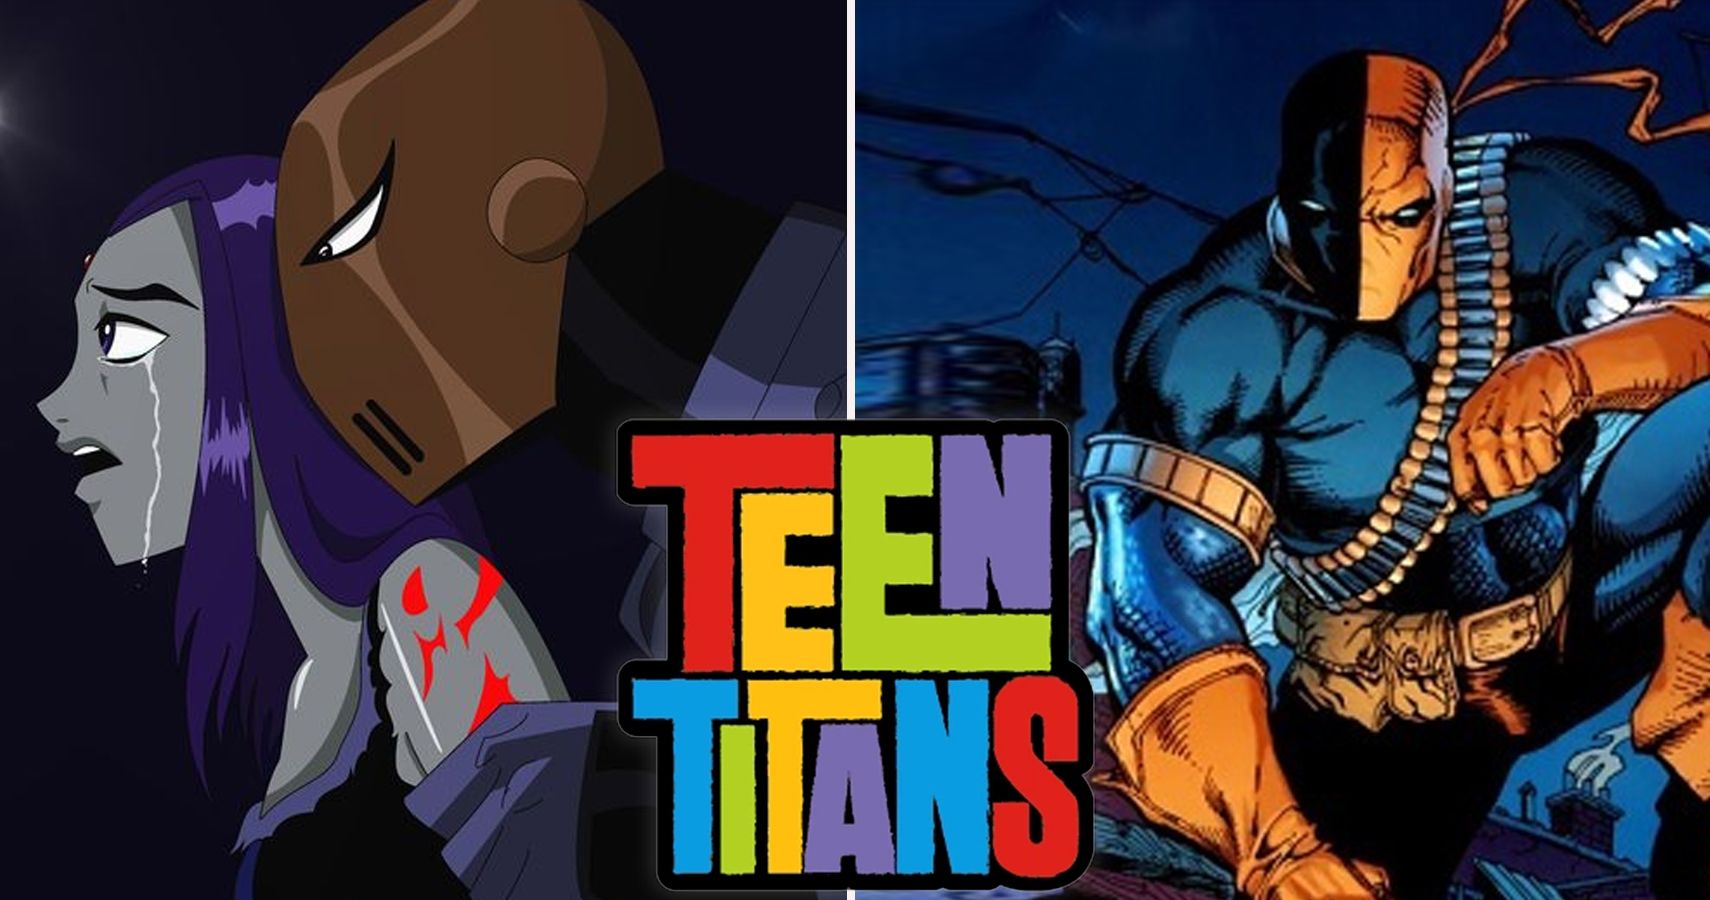 lancering kussen Ruim Deathstroke: Things You Never Knew About Slade From Teen Titans